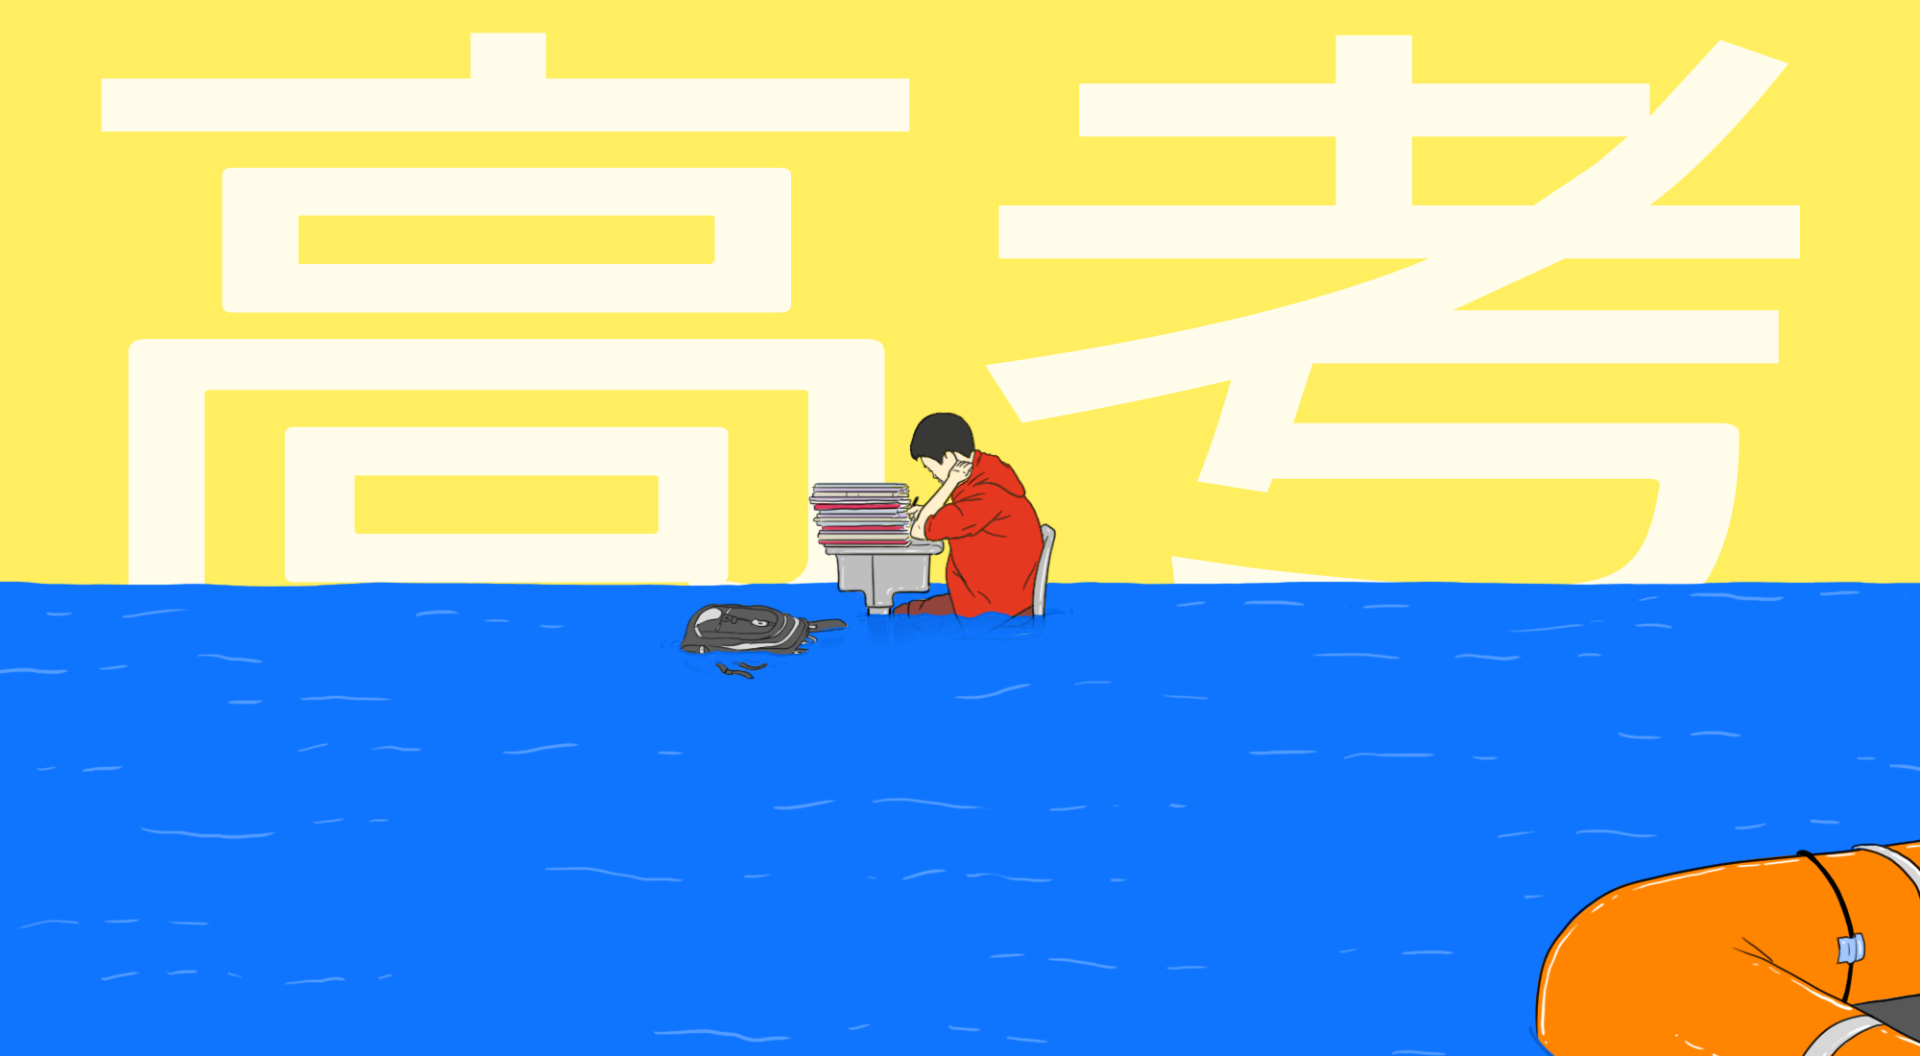 illustration of a student in china taking the gaokao, or college entrance exam, amid historic flooding in china